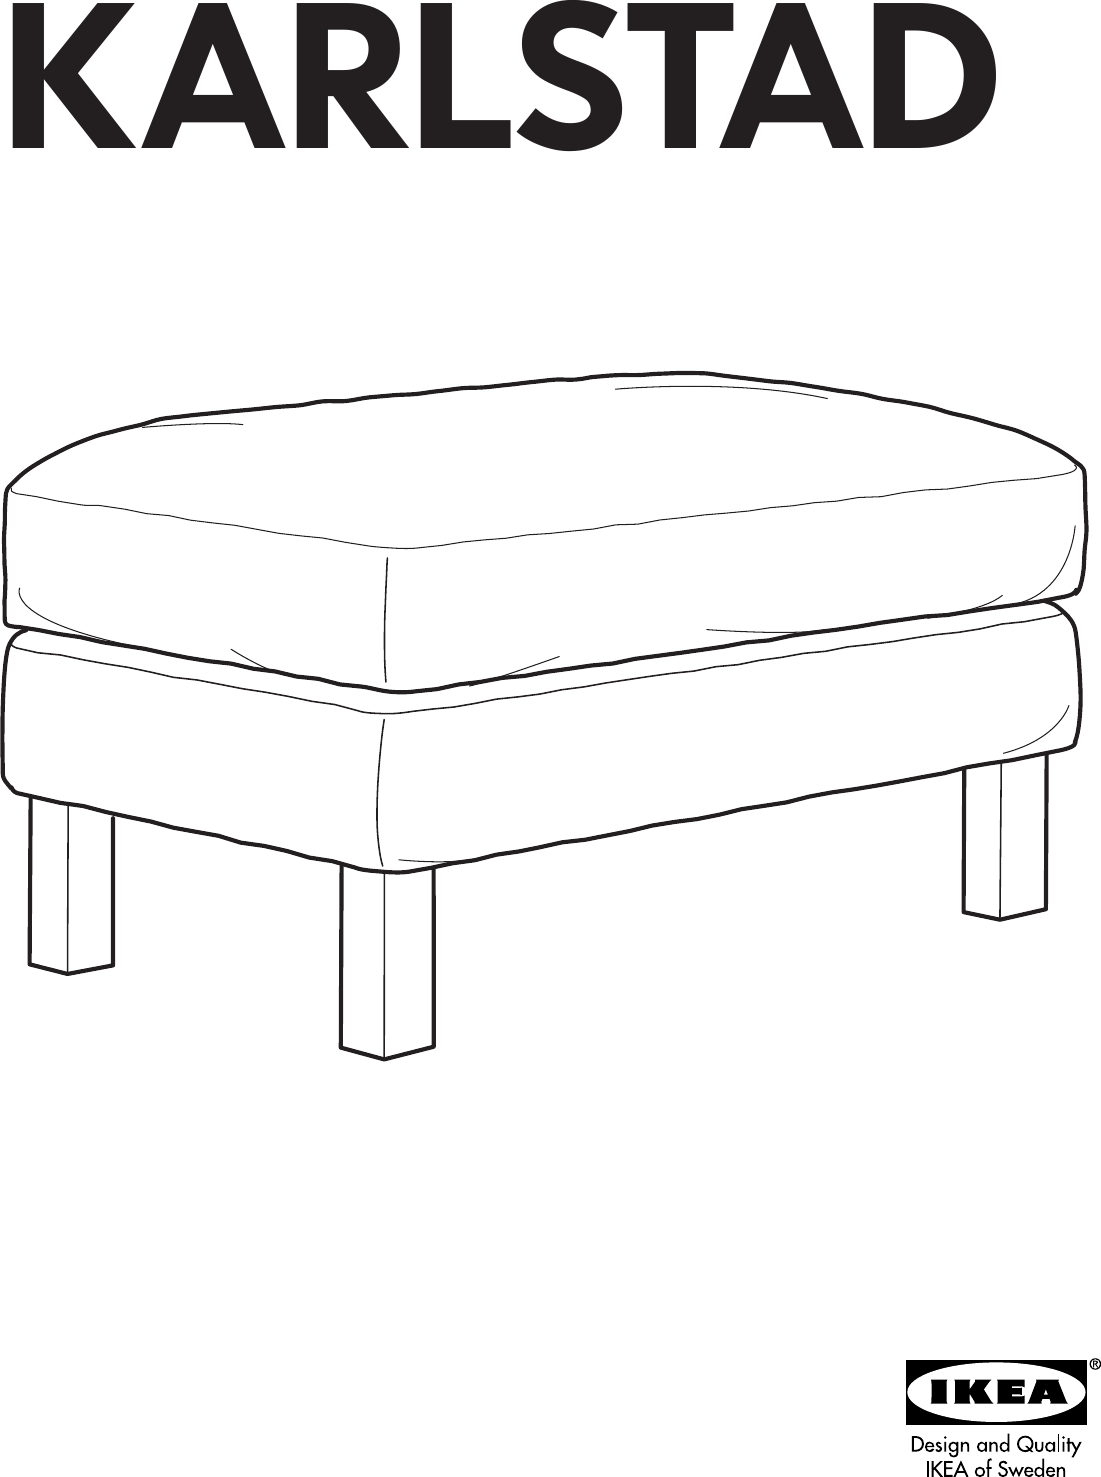 Page 1 of 8 - Ikea Ikea-Karlstad-Footstool-Frame-Cover-Assembly-Instruction